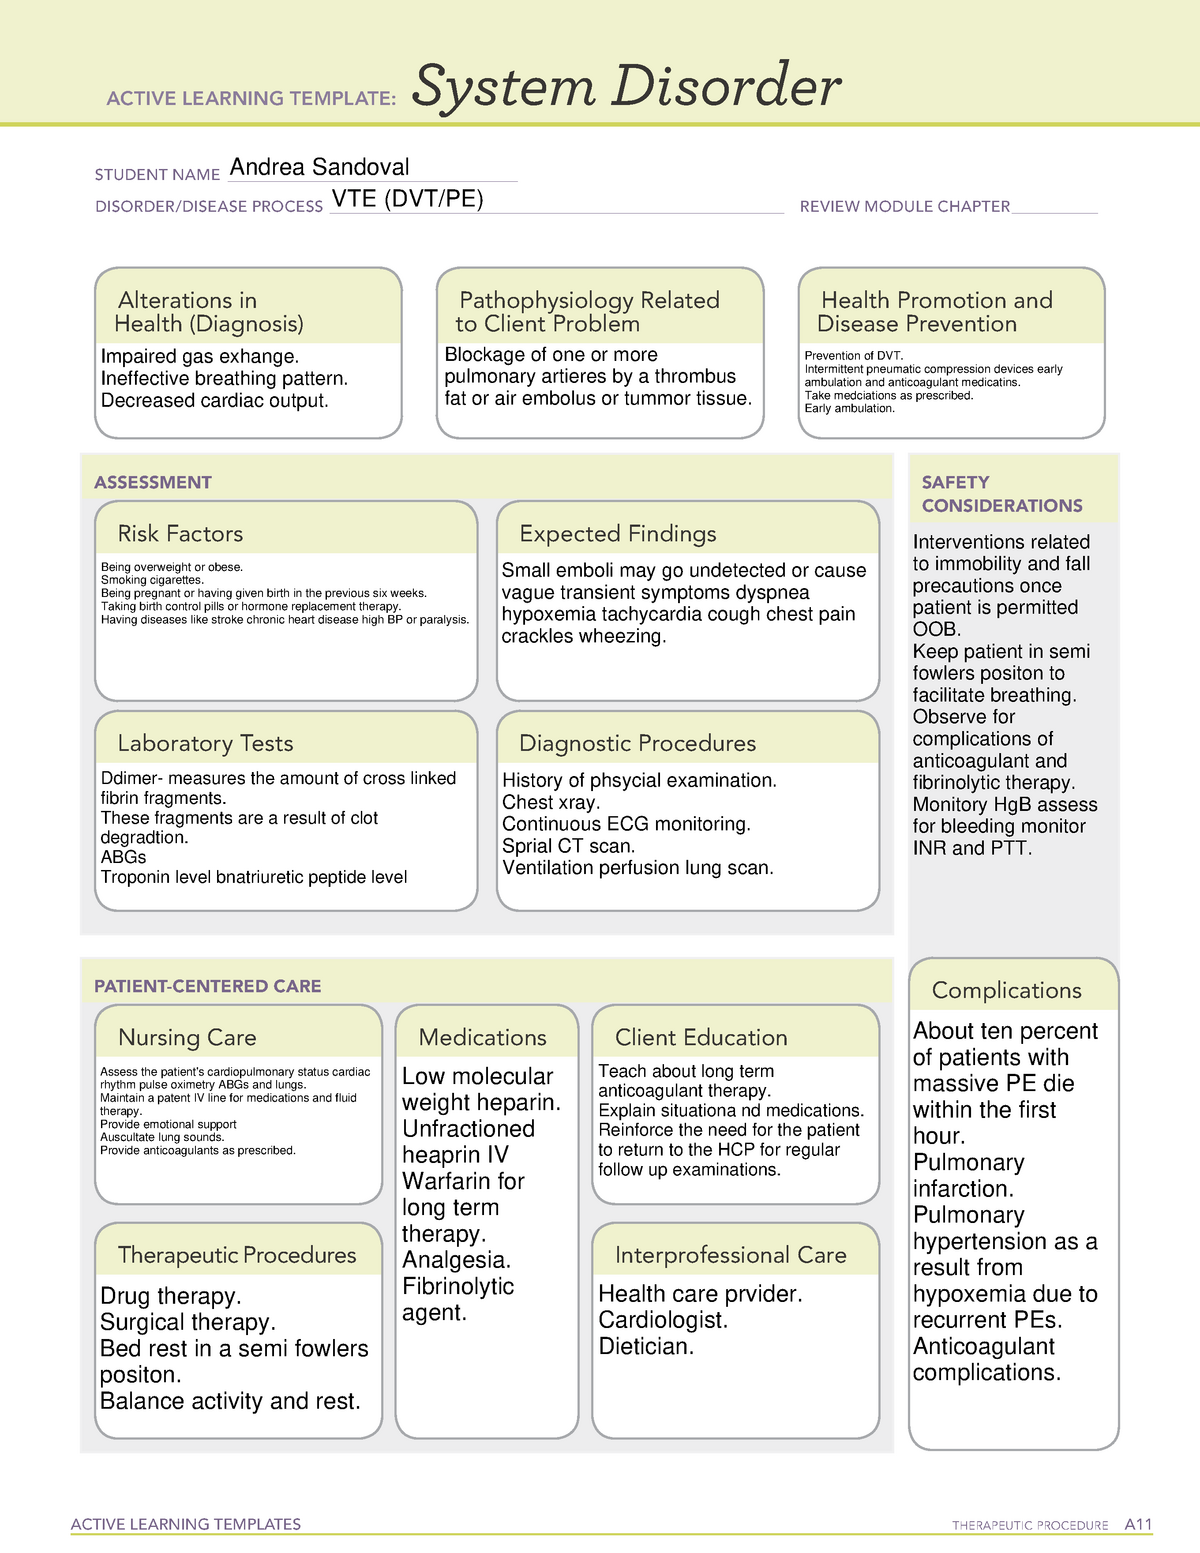 dvt-system-disorder-active-learning-templates-therapeutic-procedure-a